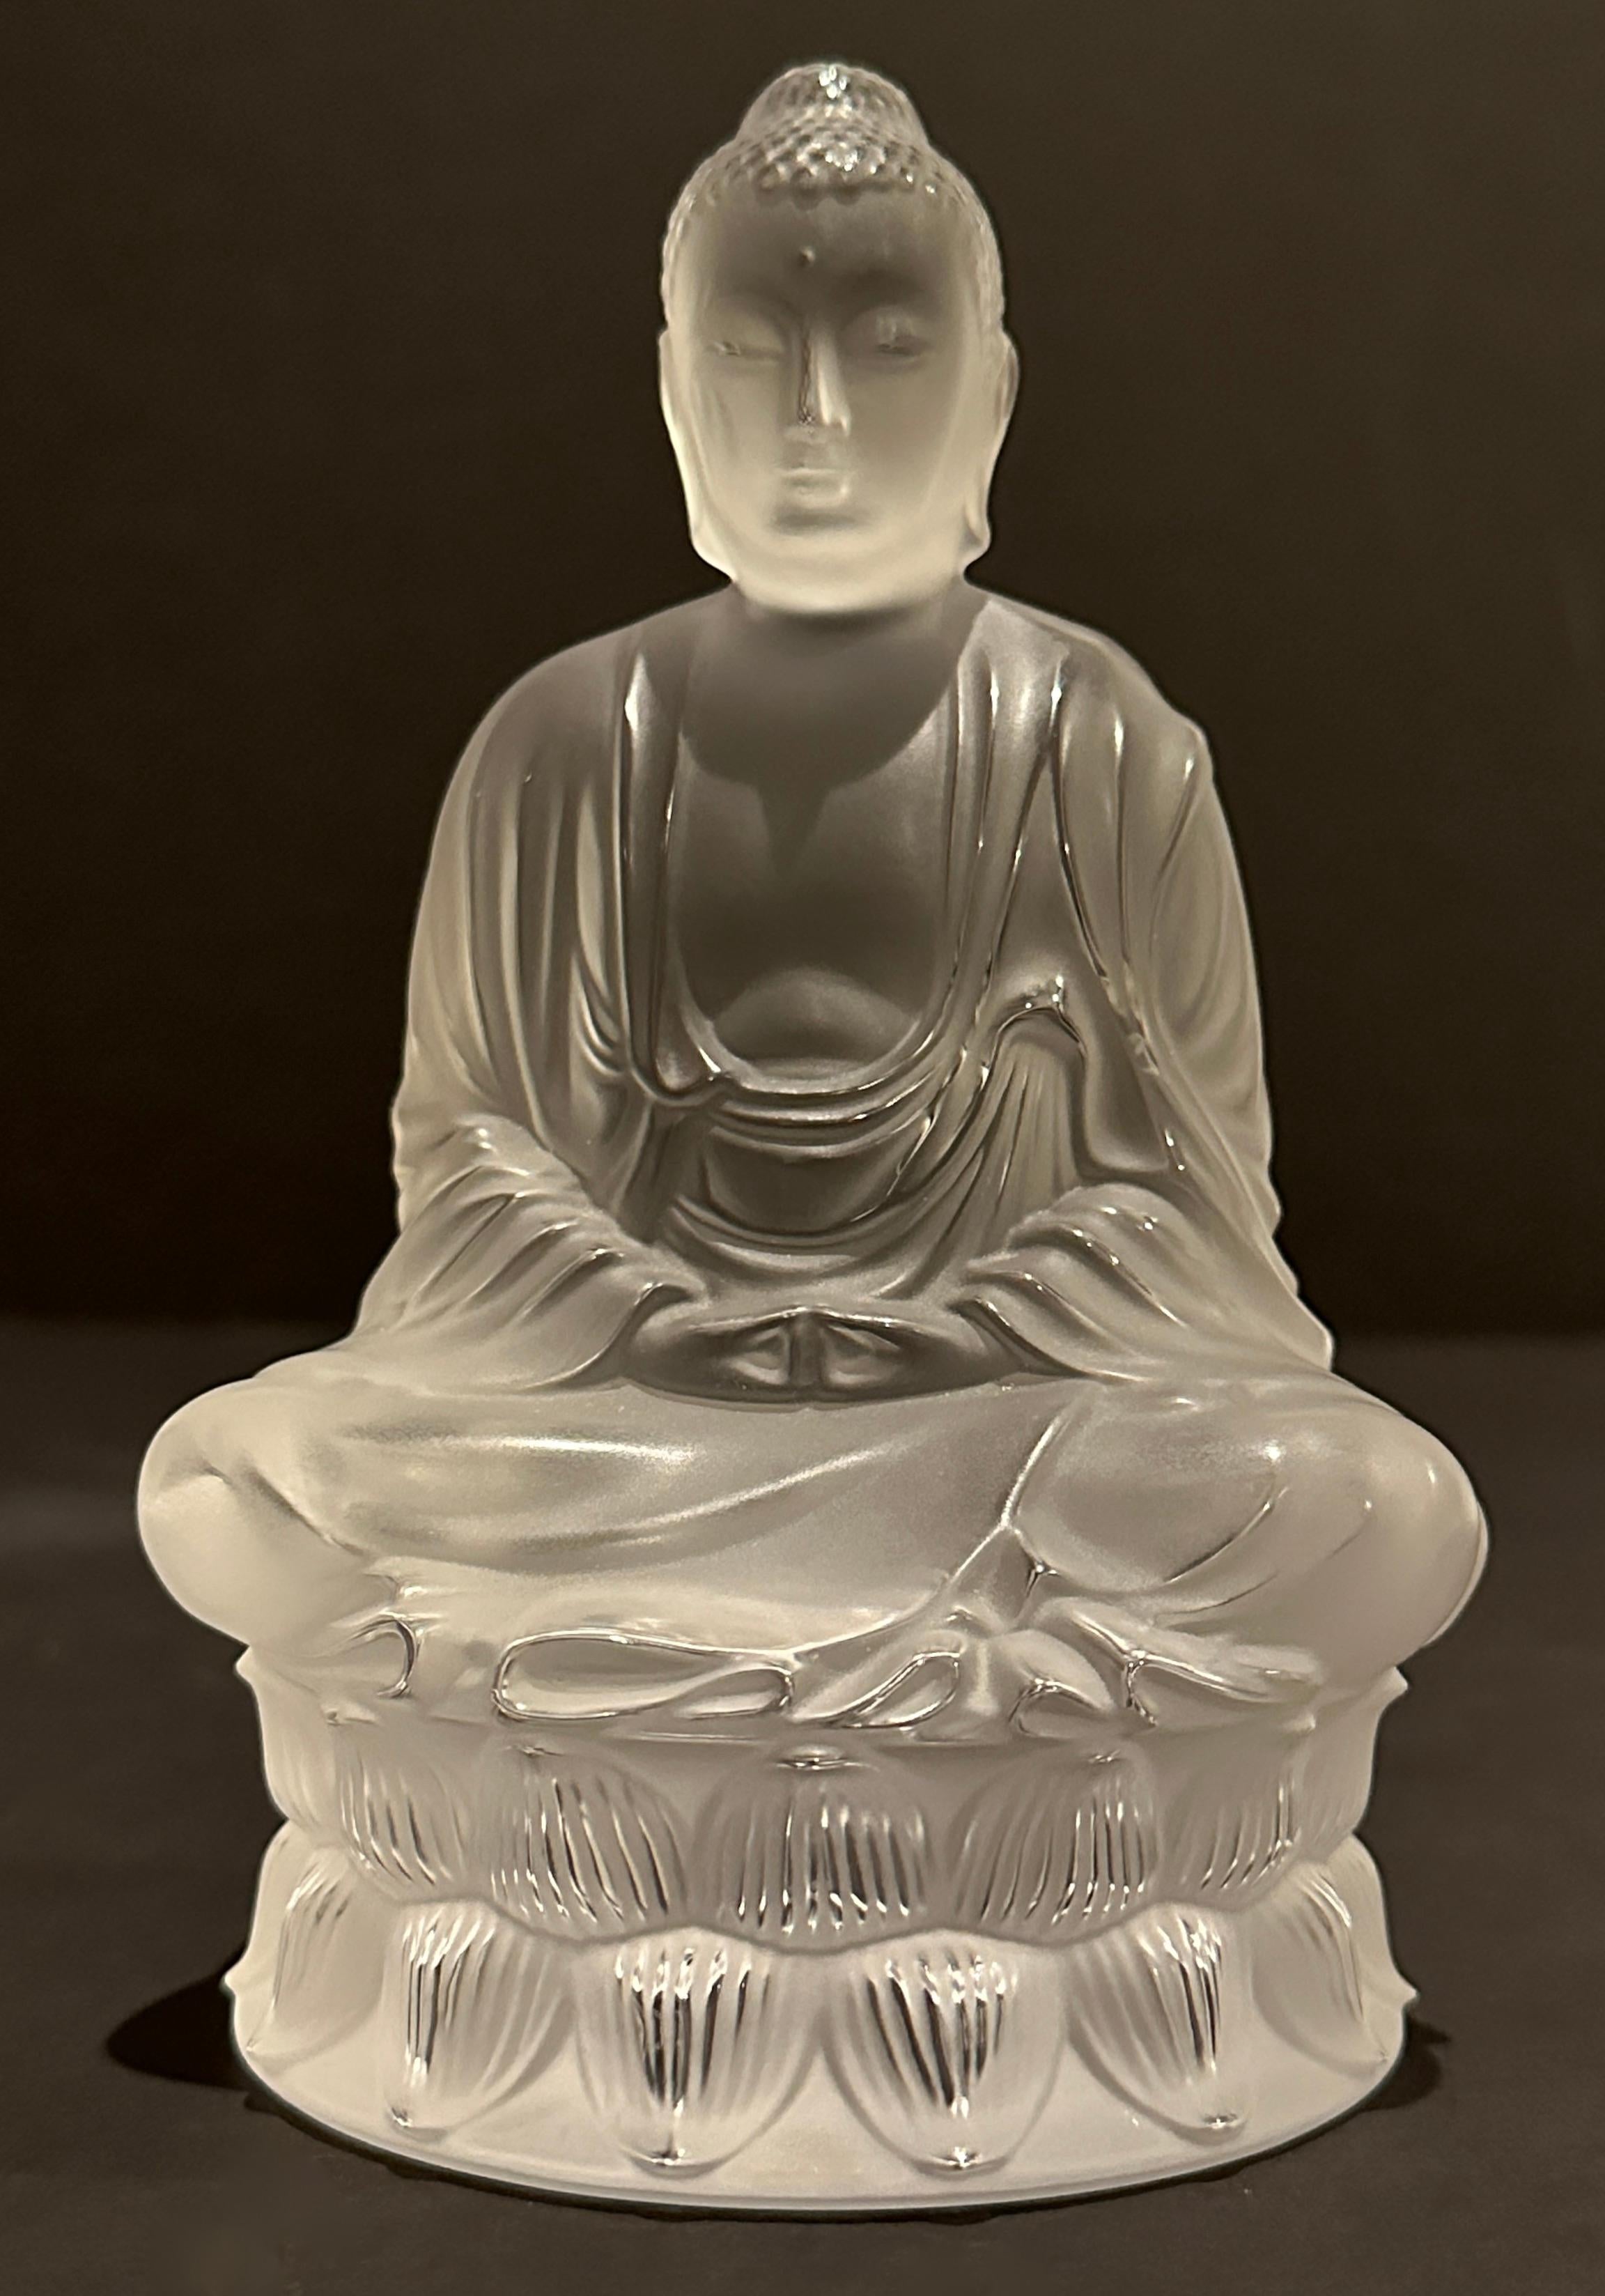 A stunning rendition of the sage on whose teachings Buddhism was founded. The Buddha meditates solemnly in this Fine mouth-blown and hand carved crystal sculpture by Lalique. Delicately hand-finished to a satin glow. Handmade in France.